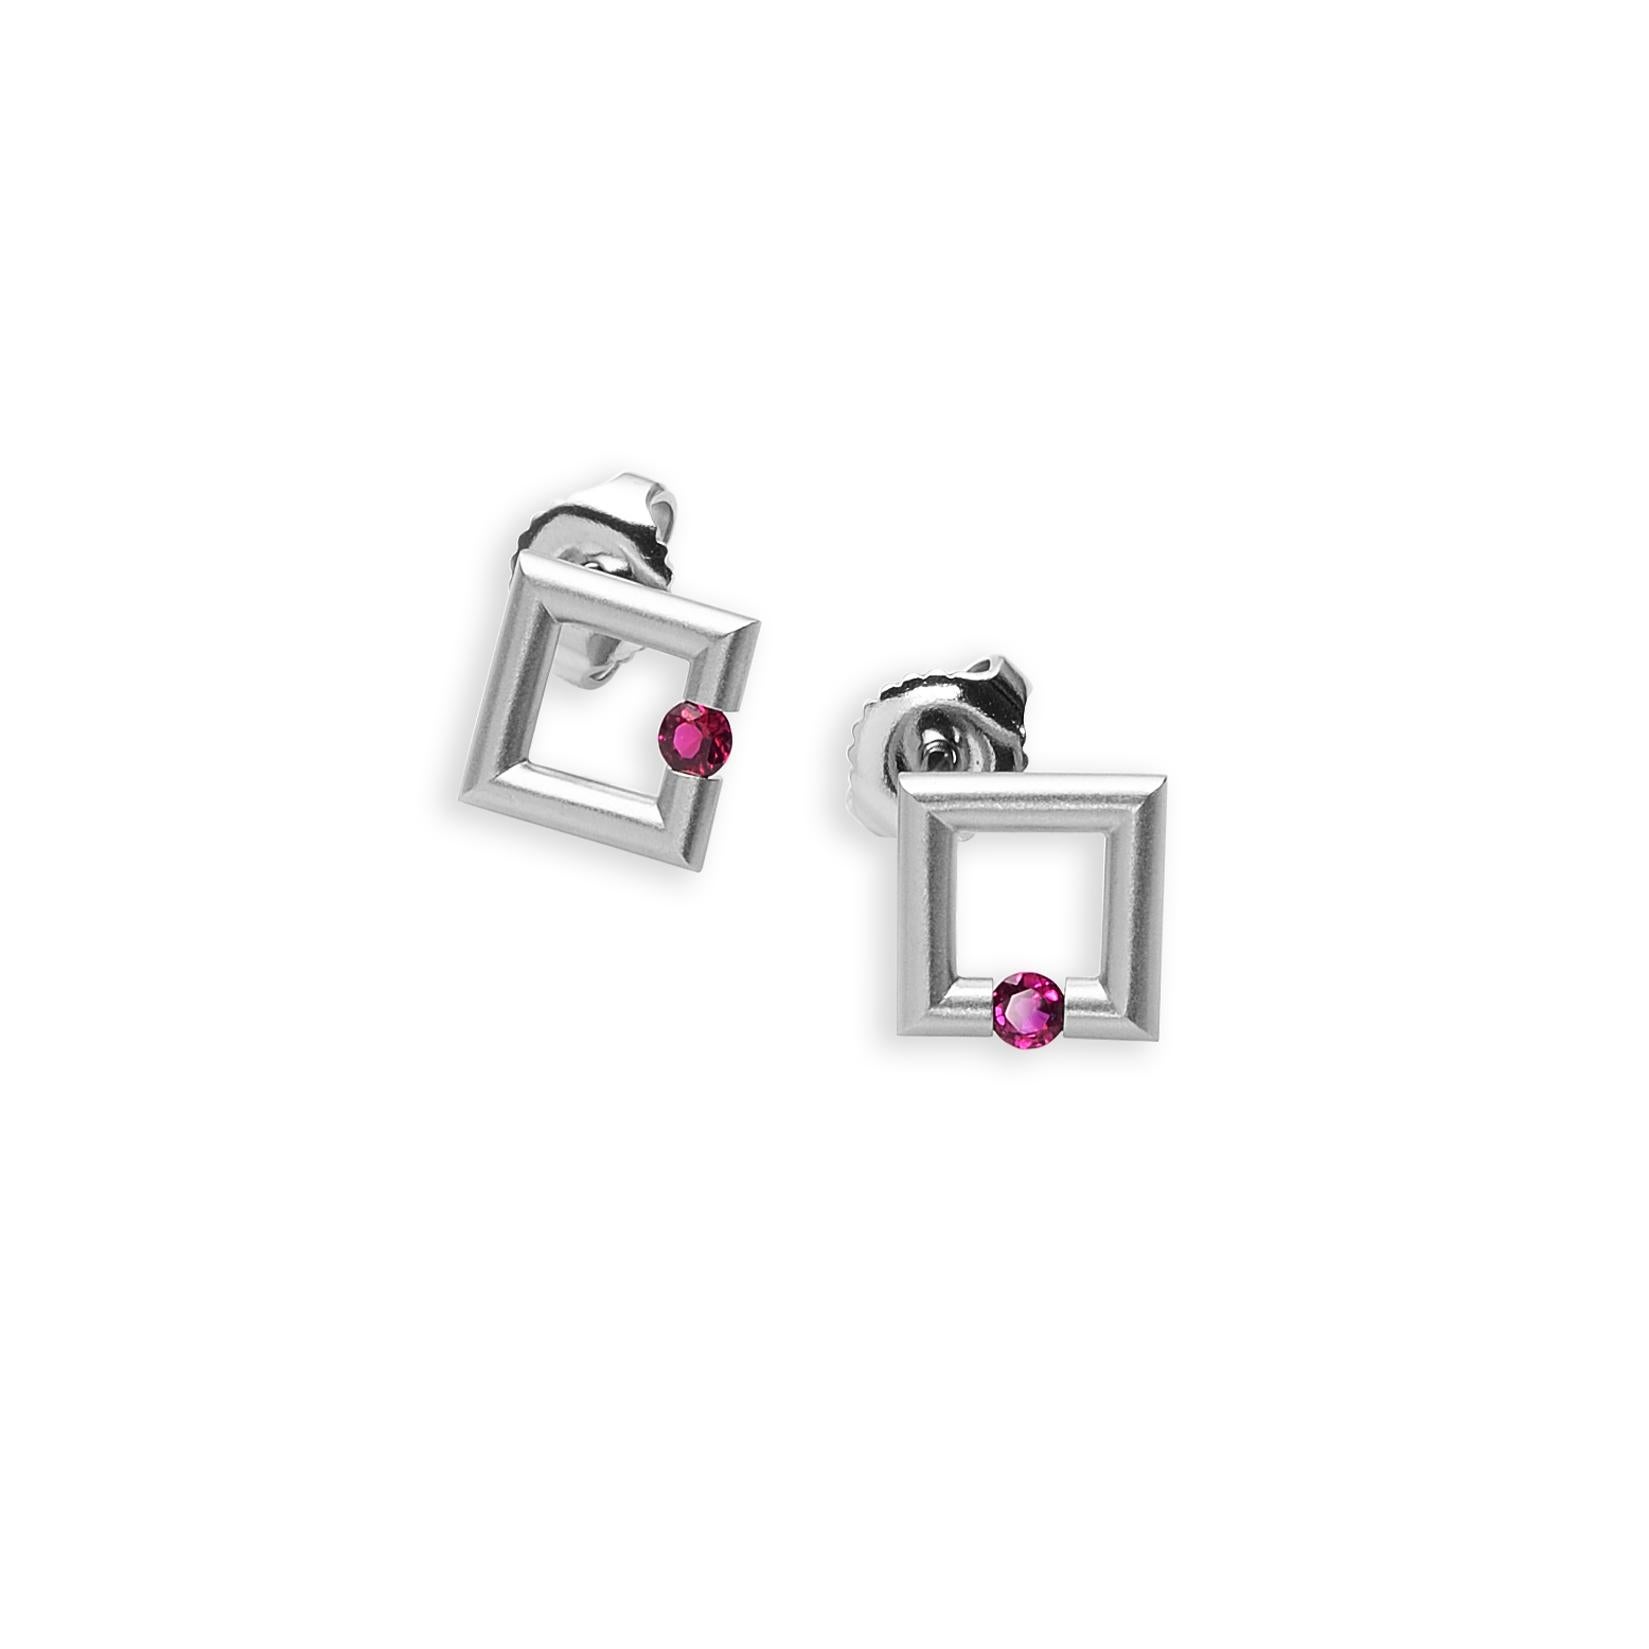 Modern Steven Kretchmer Platinum Micro Square Stud Earrings with Tension-Set Rubies For Sale